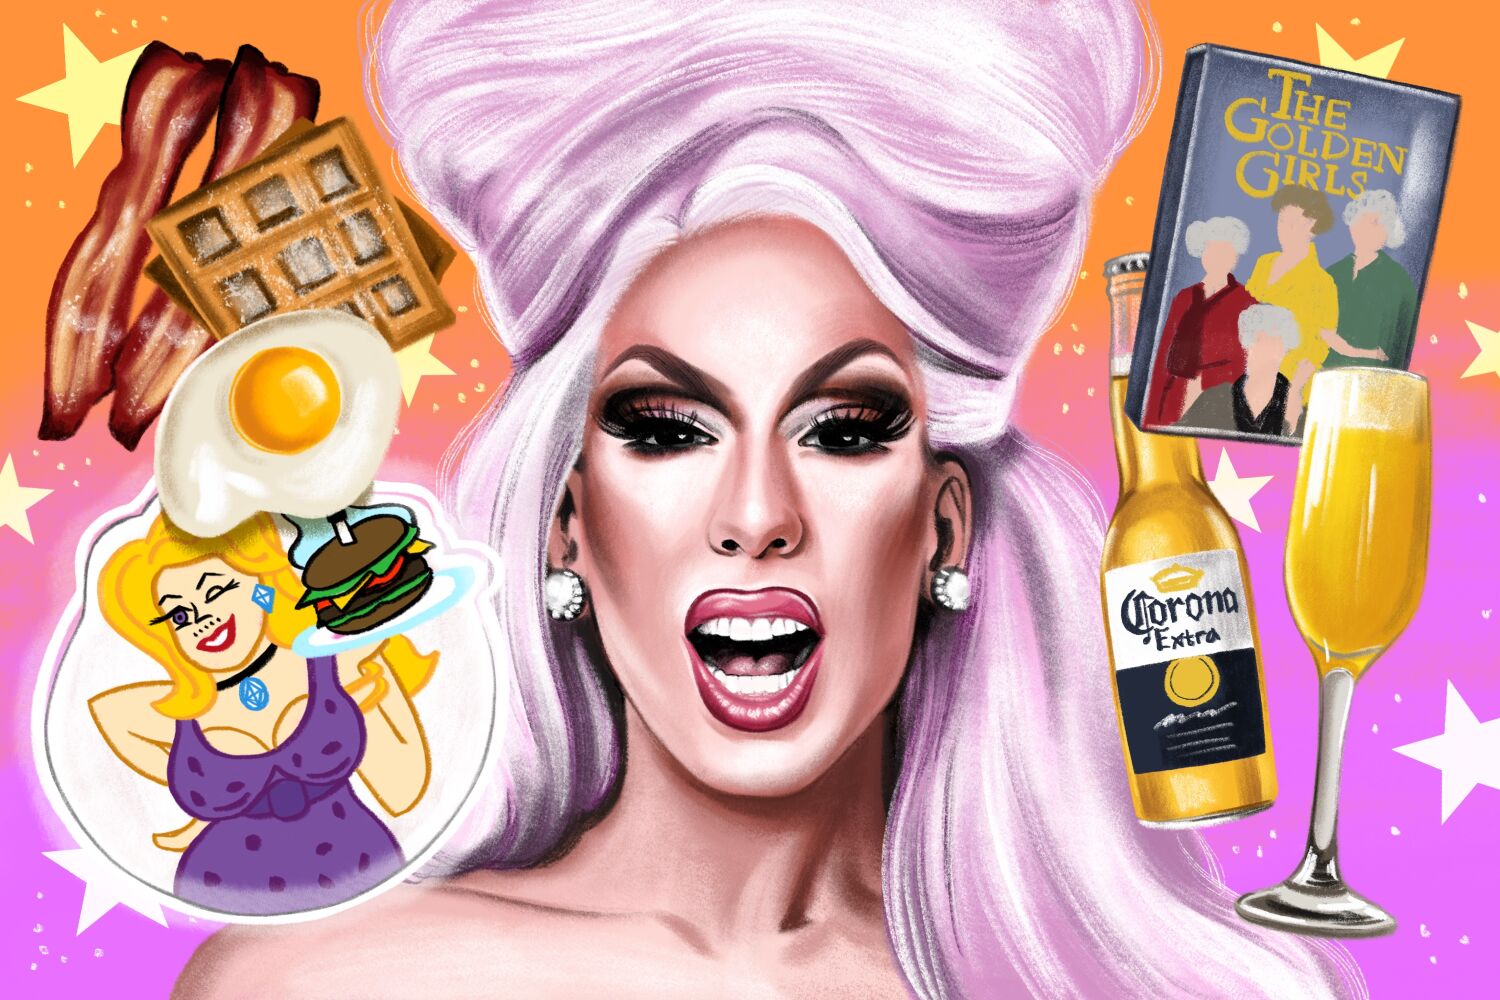 Take a tour of drag icon Alaska's fave L.A. gay bars — drag brunch too